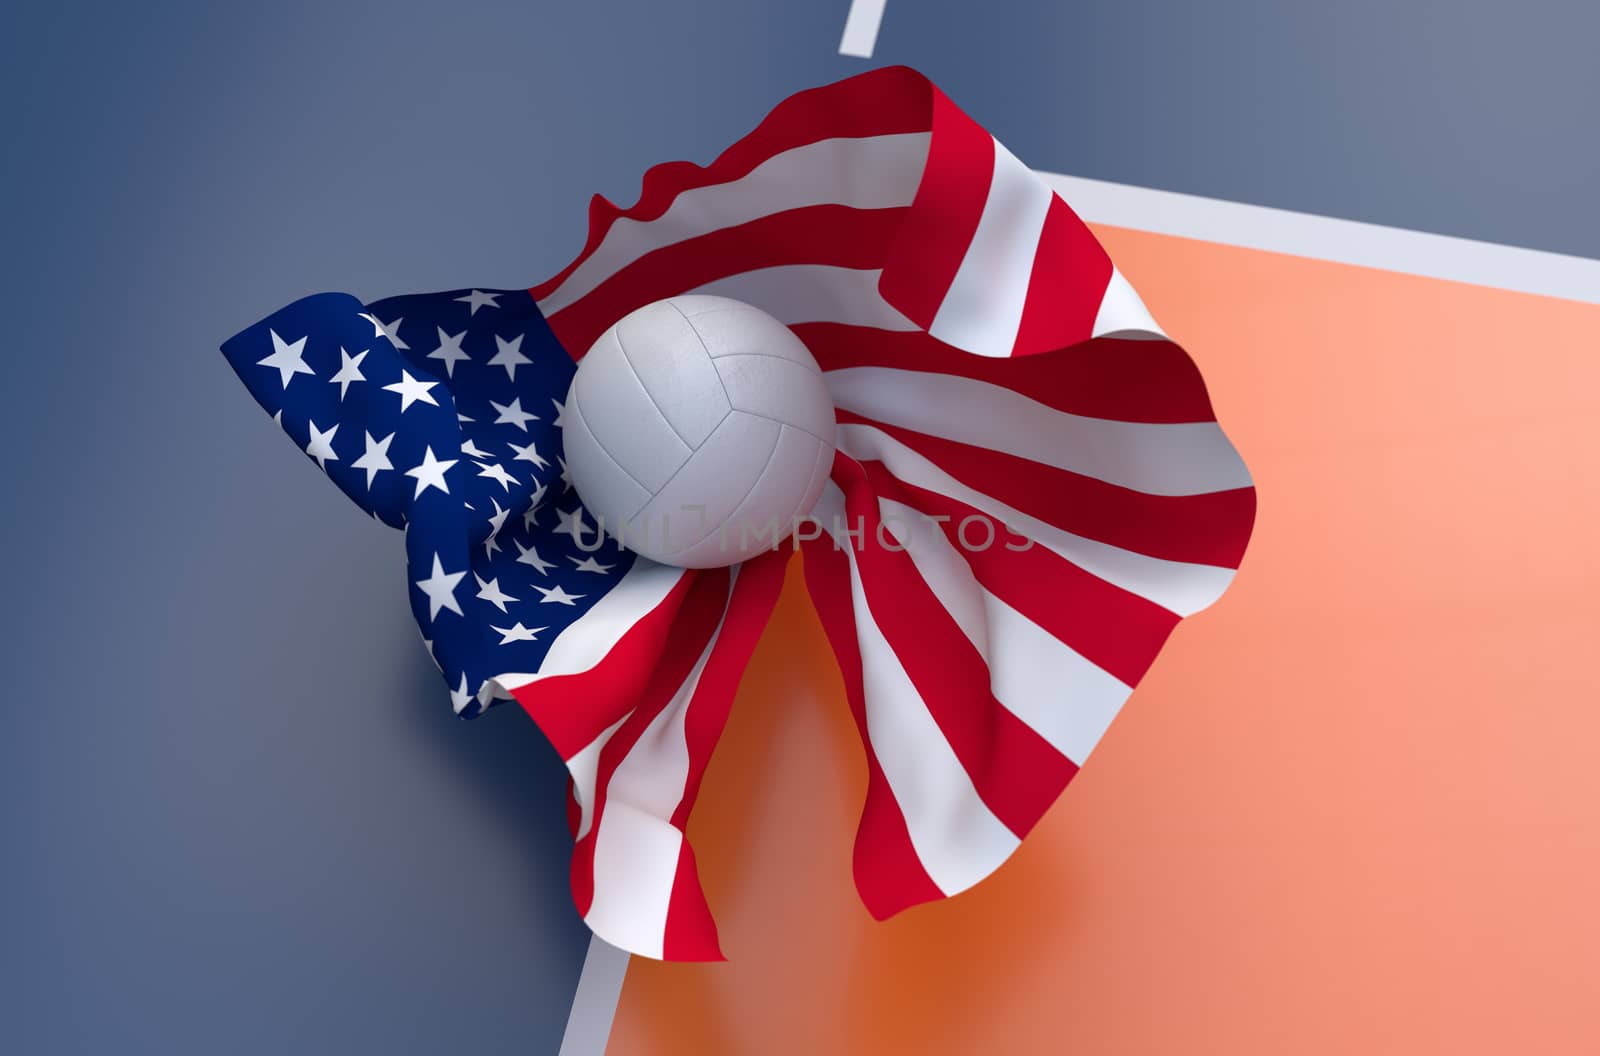 Flag of USA with championship volleyball ball on volleyball court